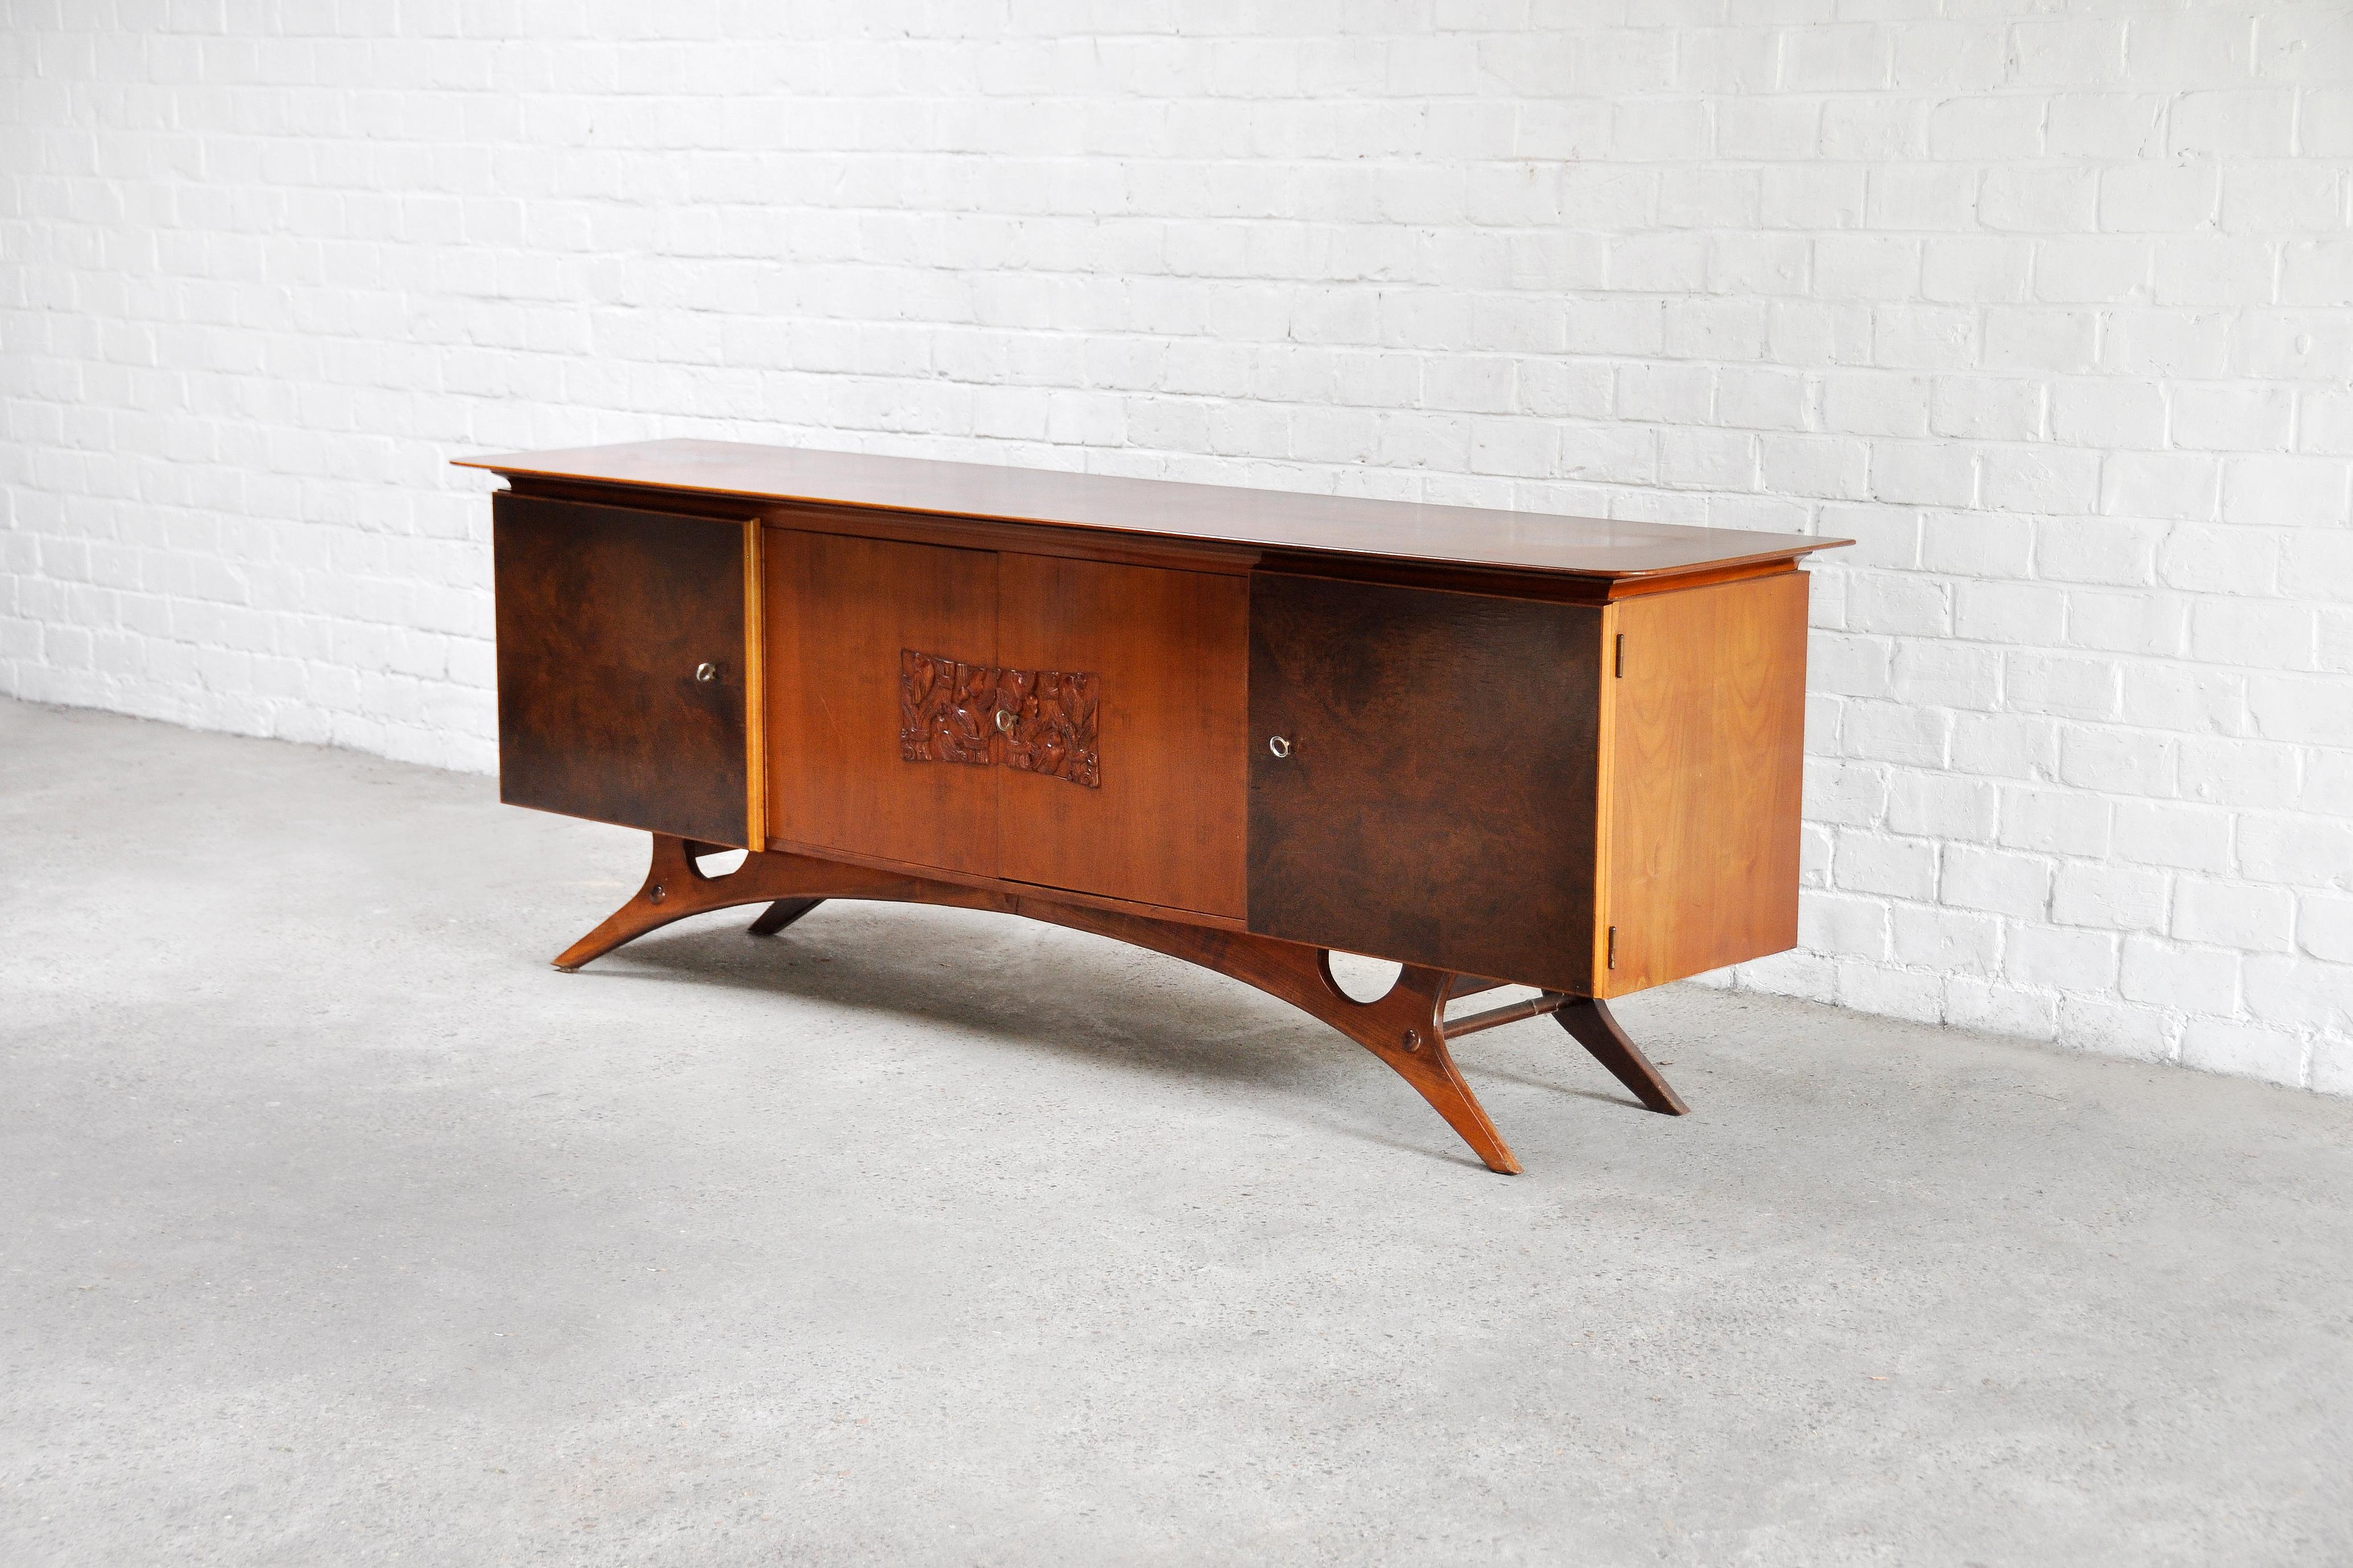 Teak Italian Modernist Sideboard with Bas-Relief Carving, 1960's